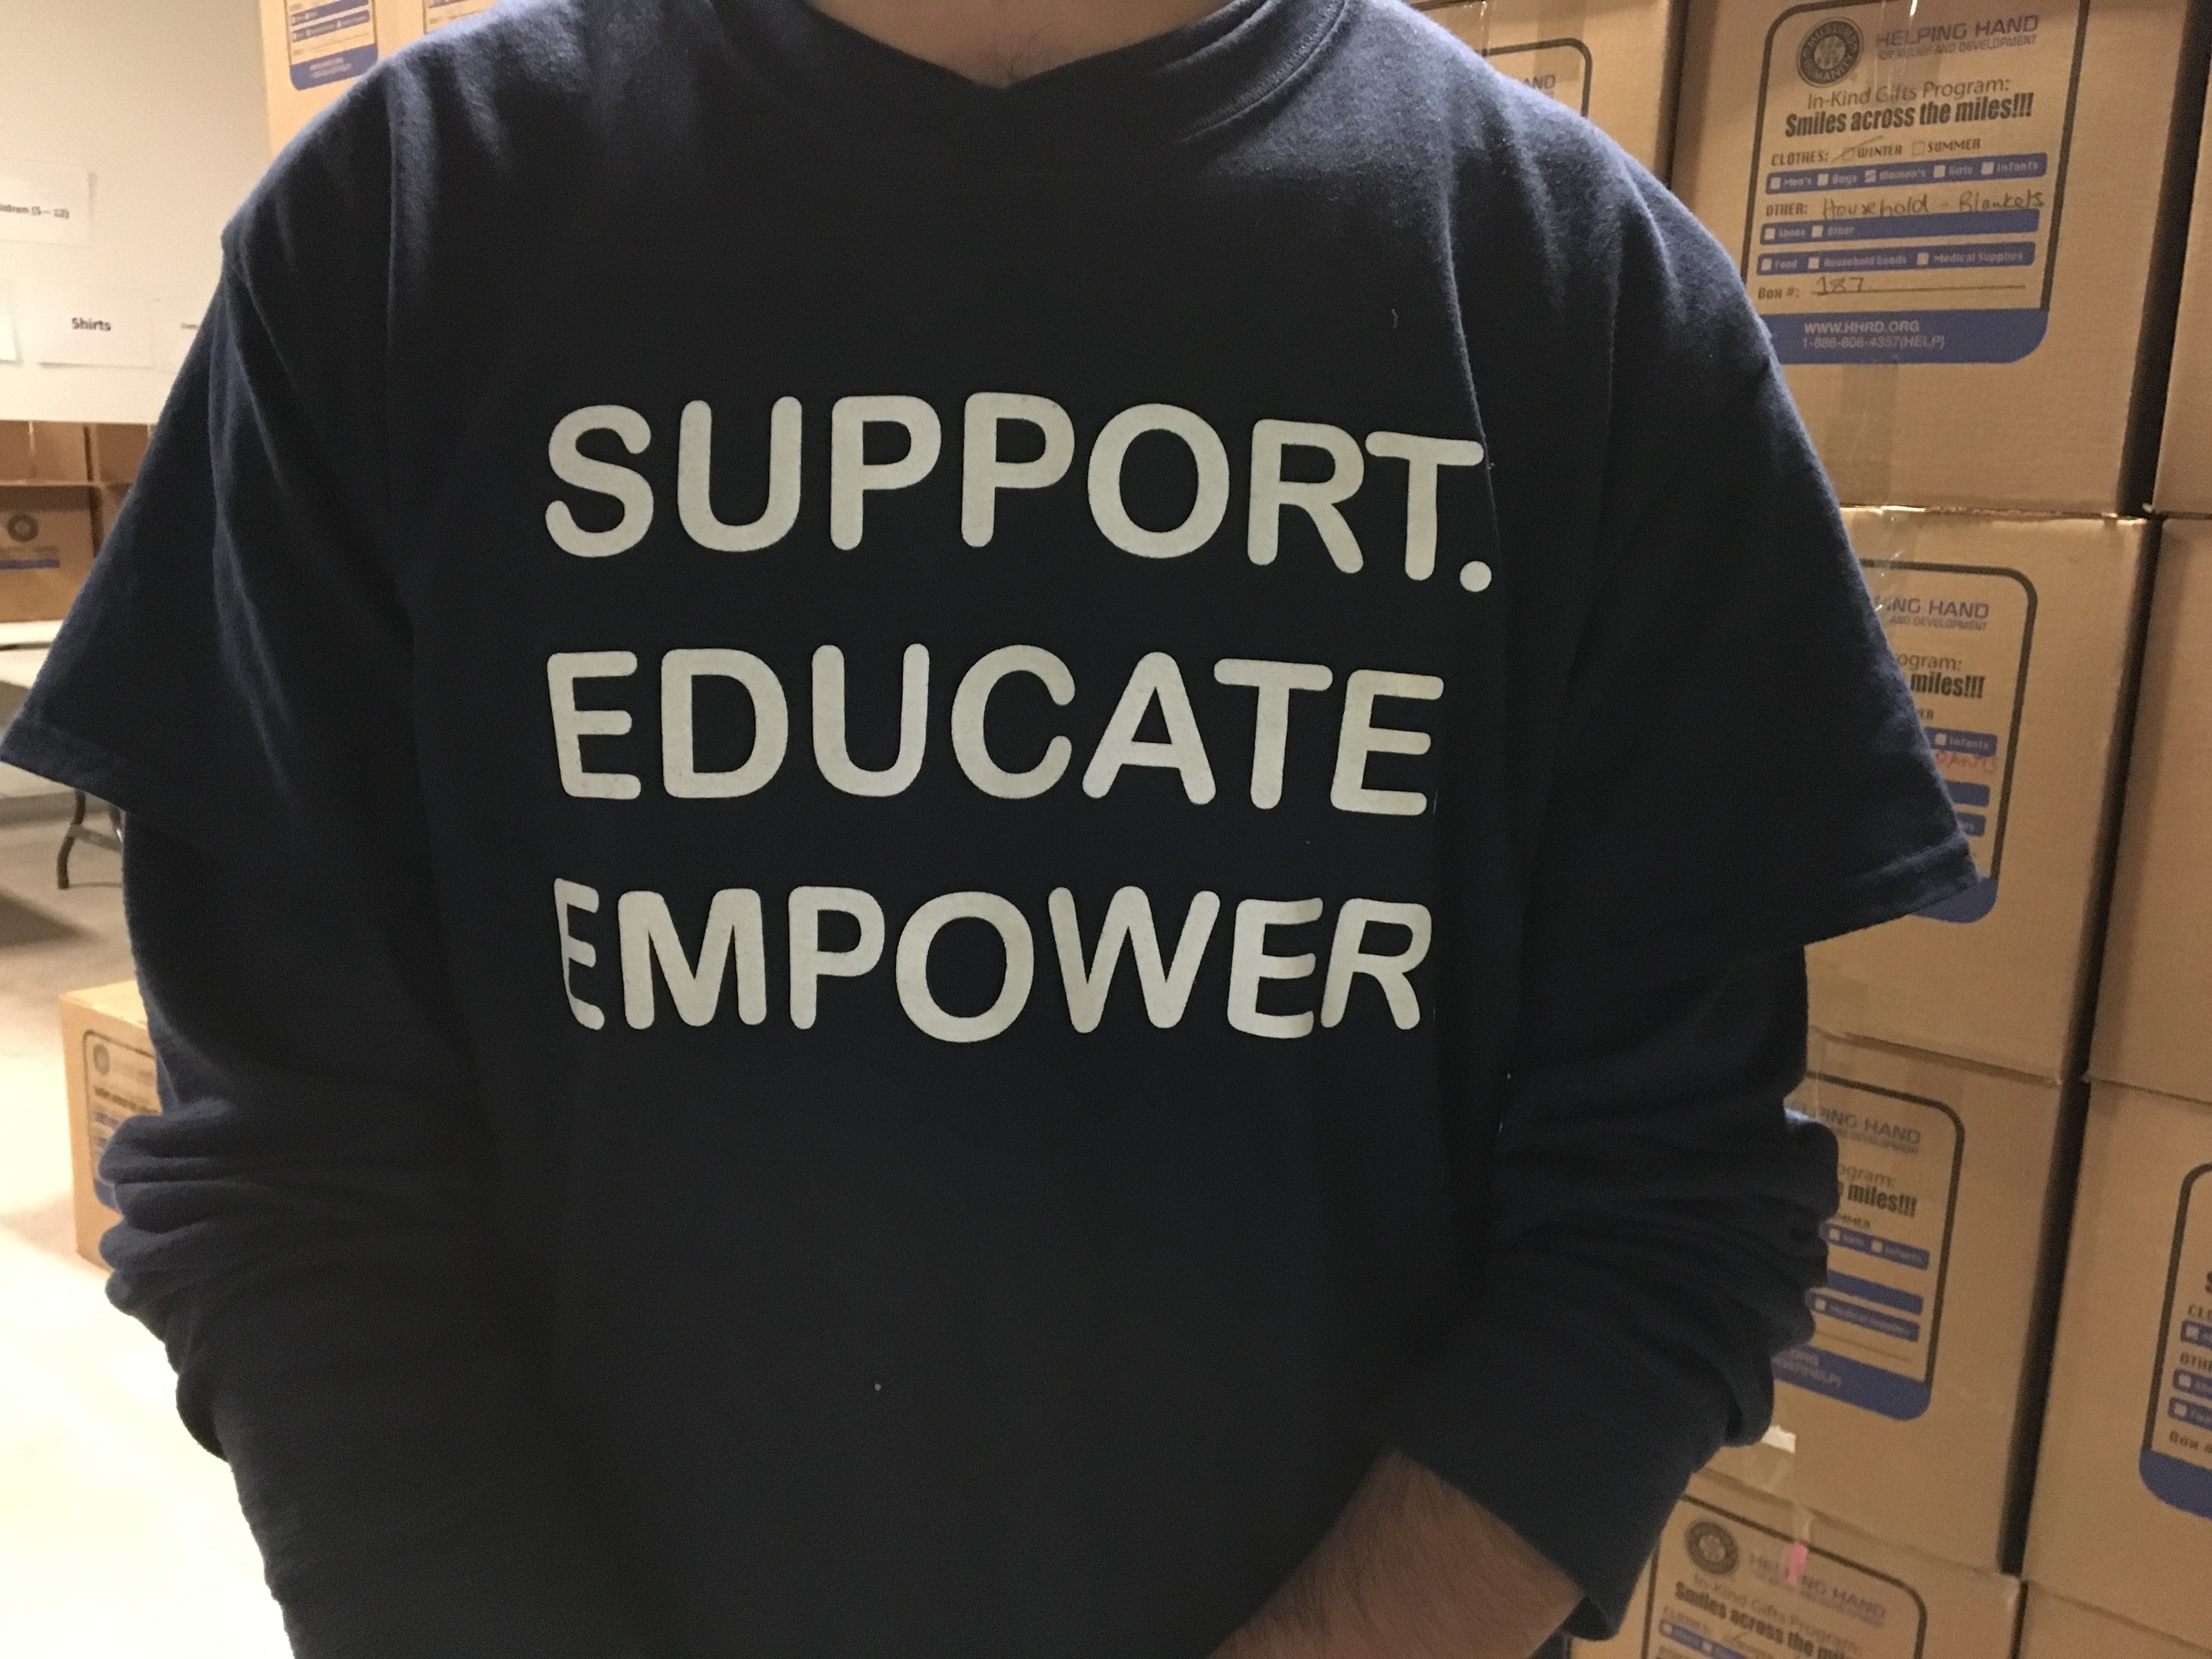 Mustafa's T-shirt reads Support, Educate, Empower